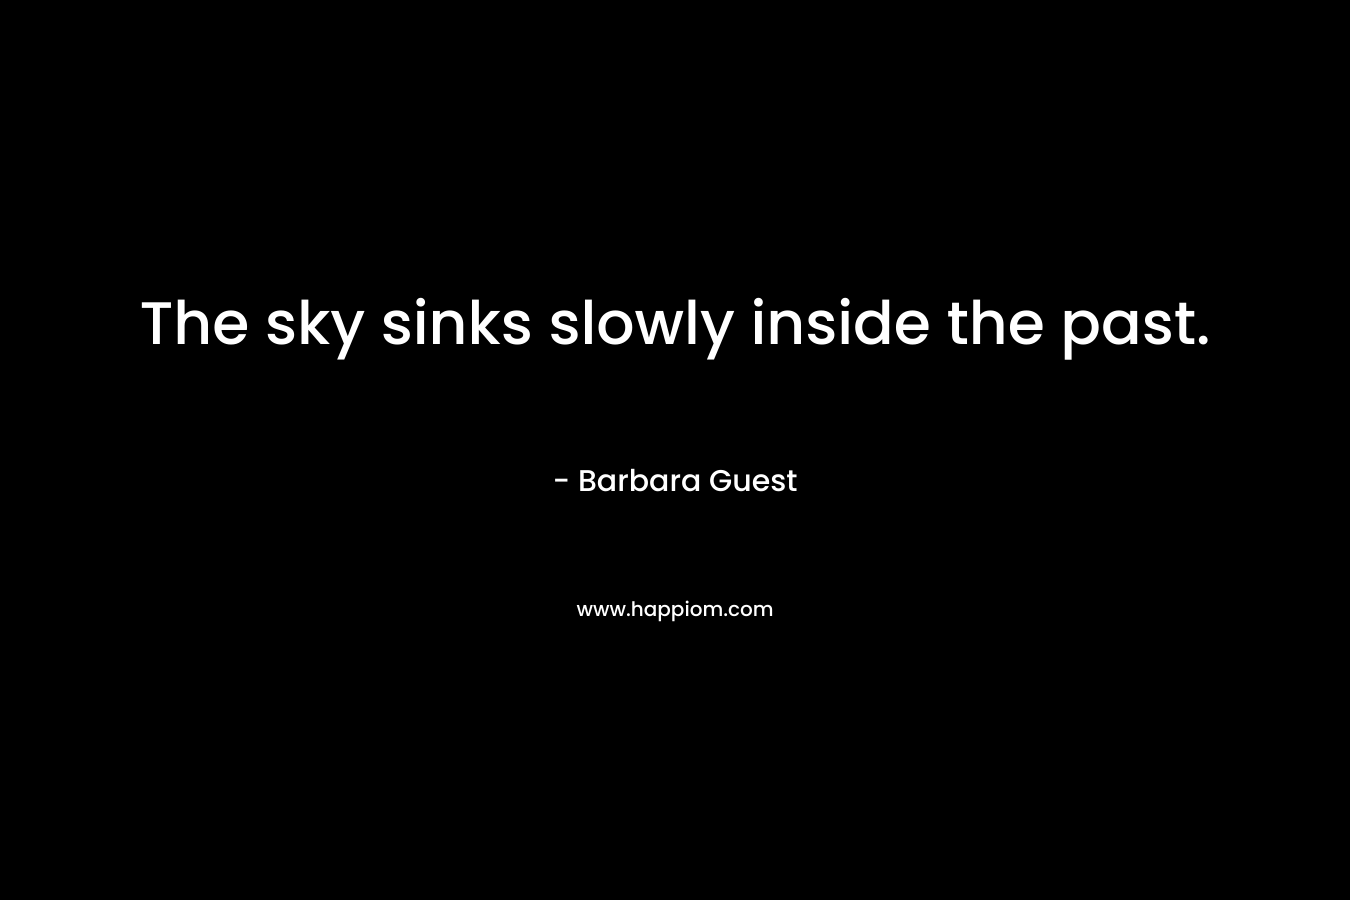 The sky sinks slowly inside the past. – Barbara Guest